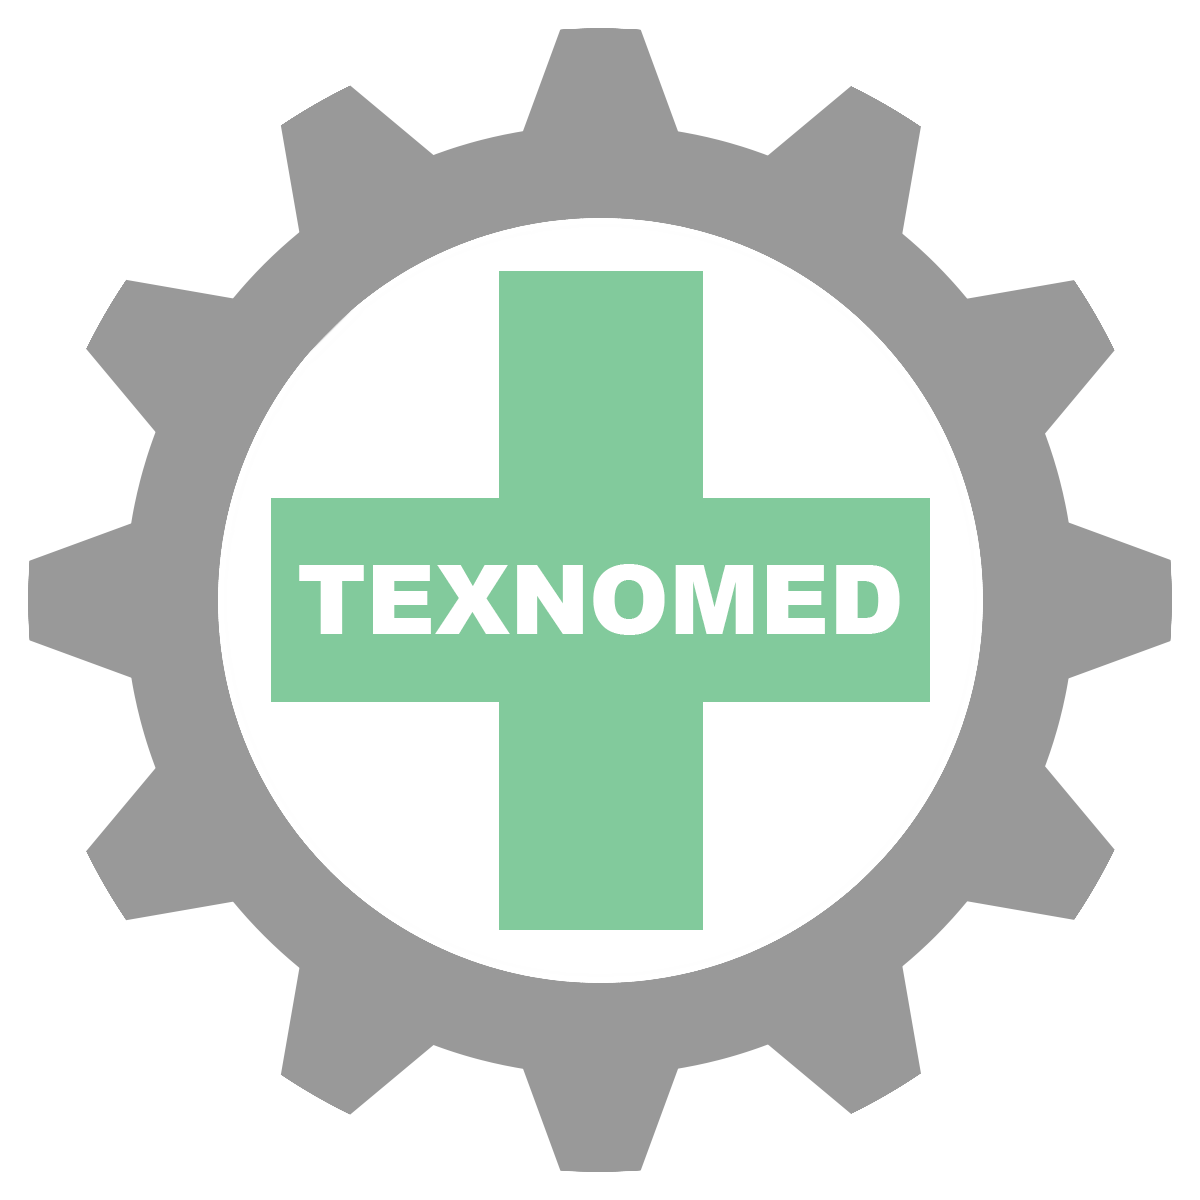 TEXNOMED